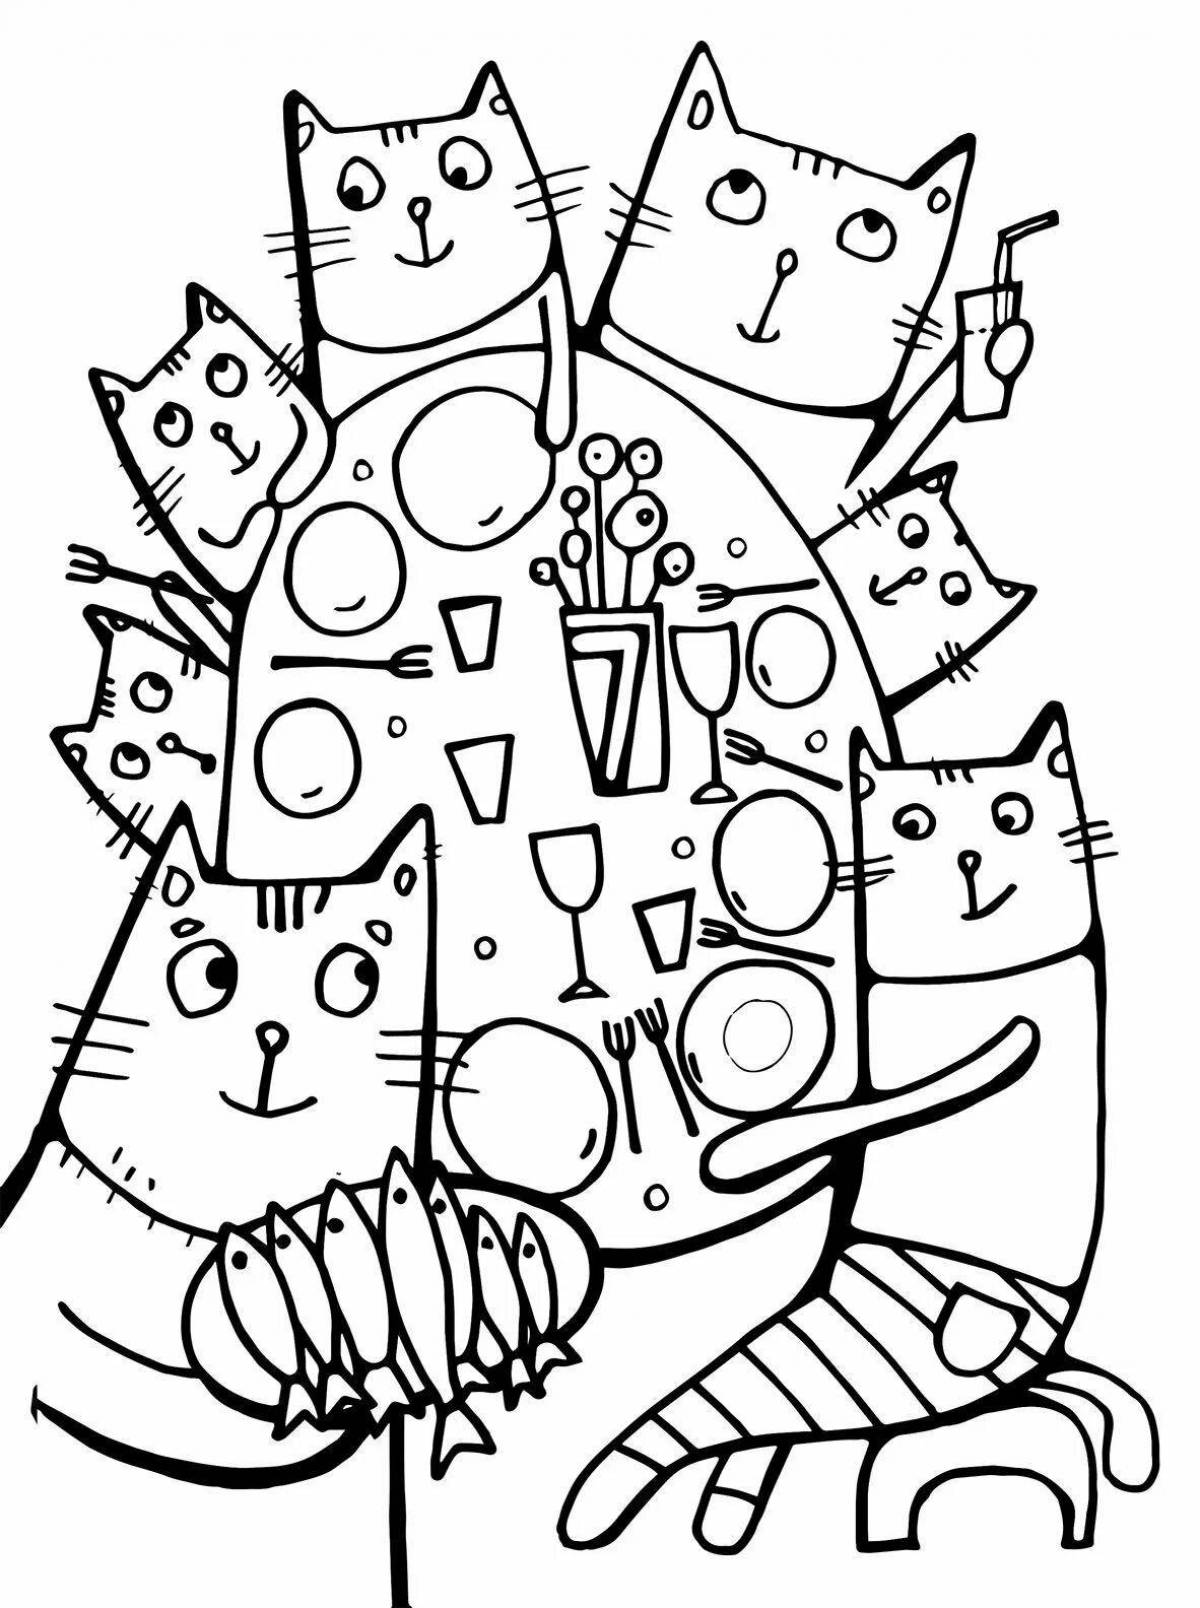 Snuggly cats coloring book